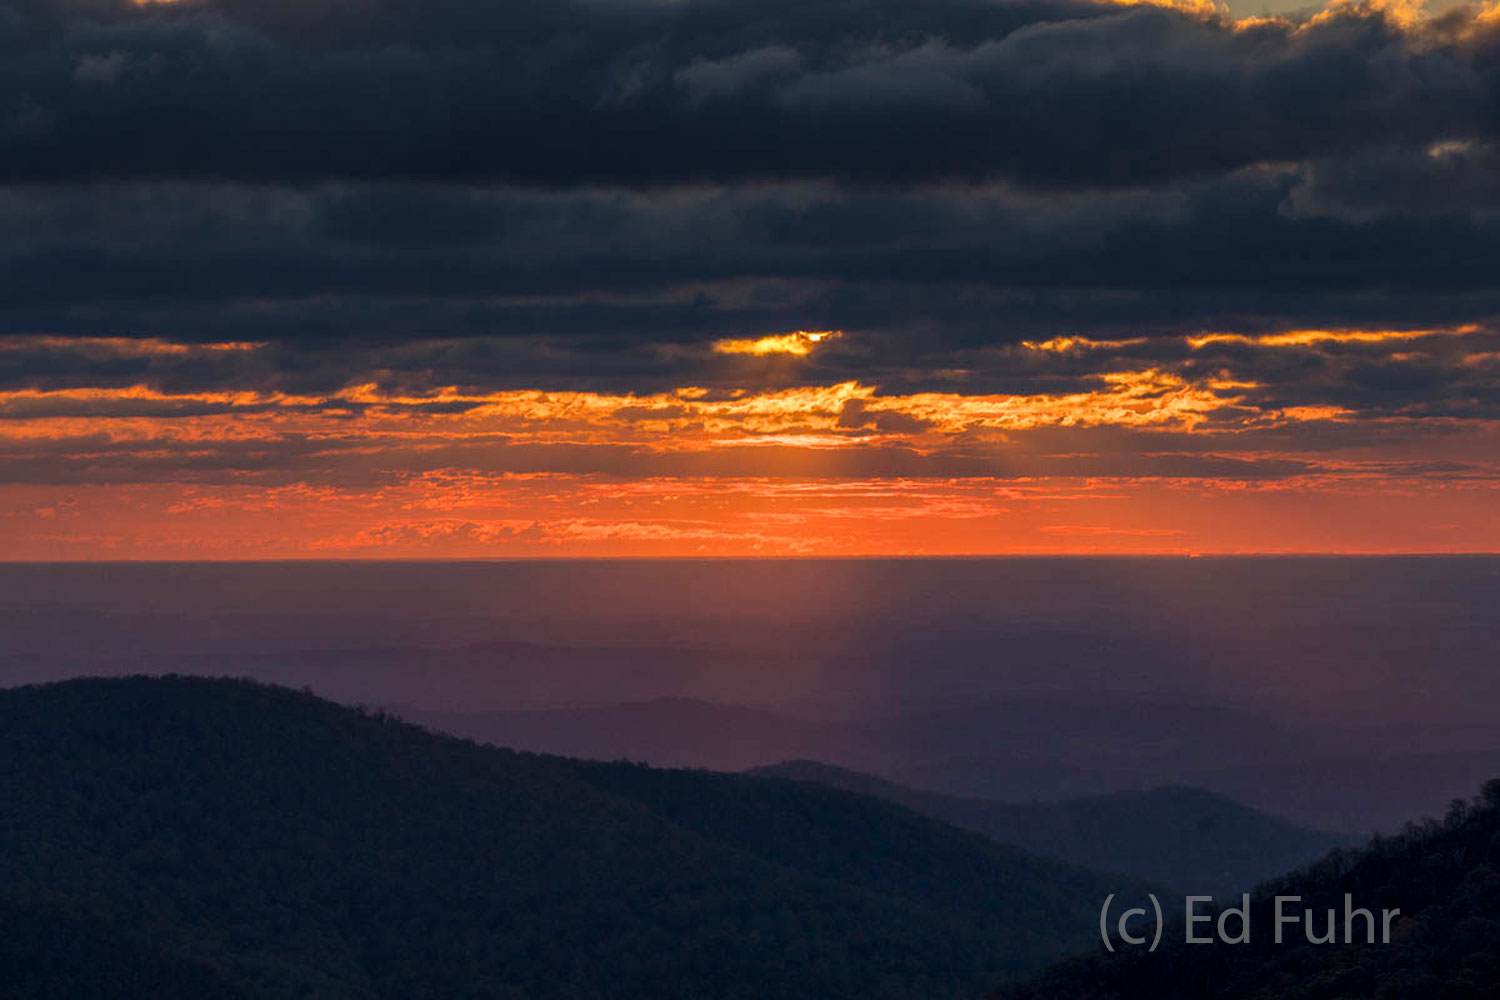 The Sun rises over the Piedmont, soon to disappear behind a bank of storm clouds.